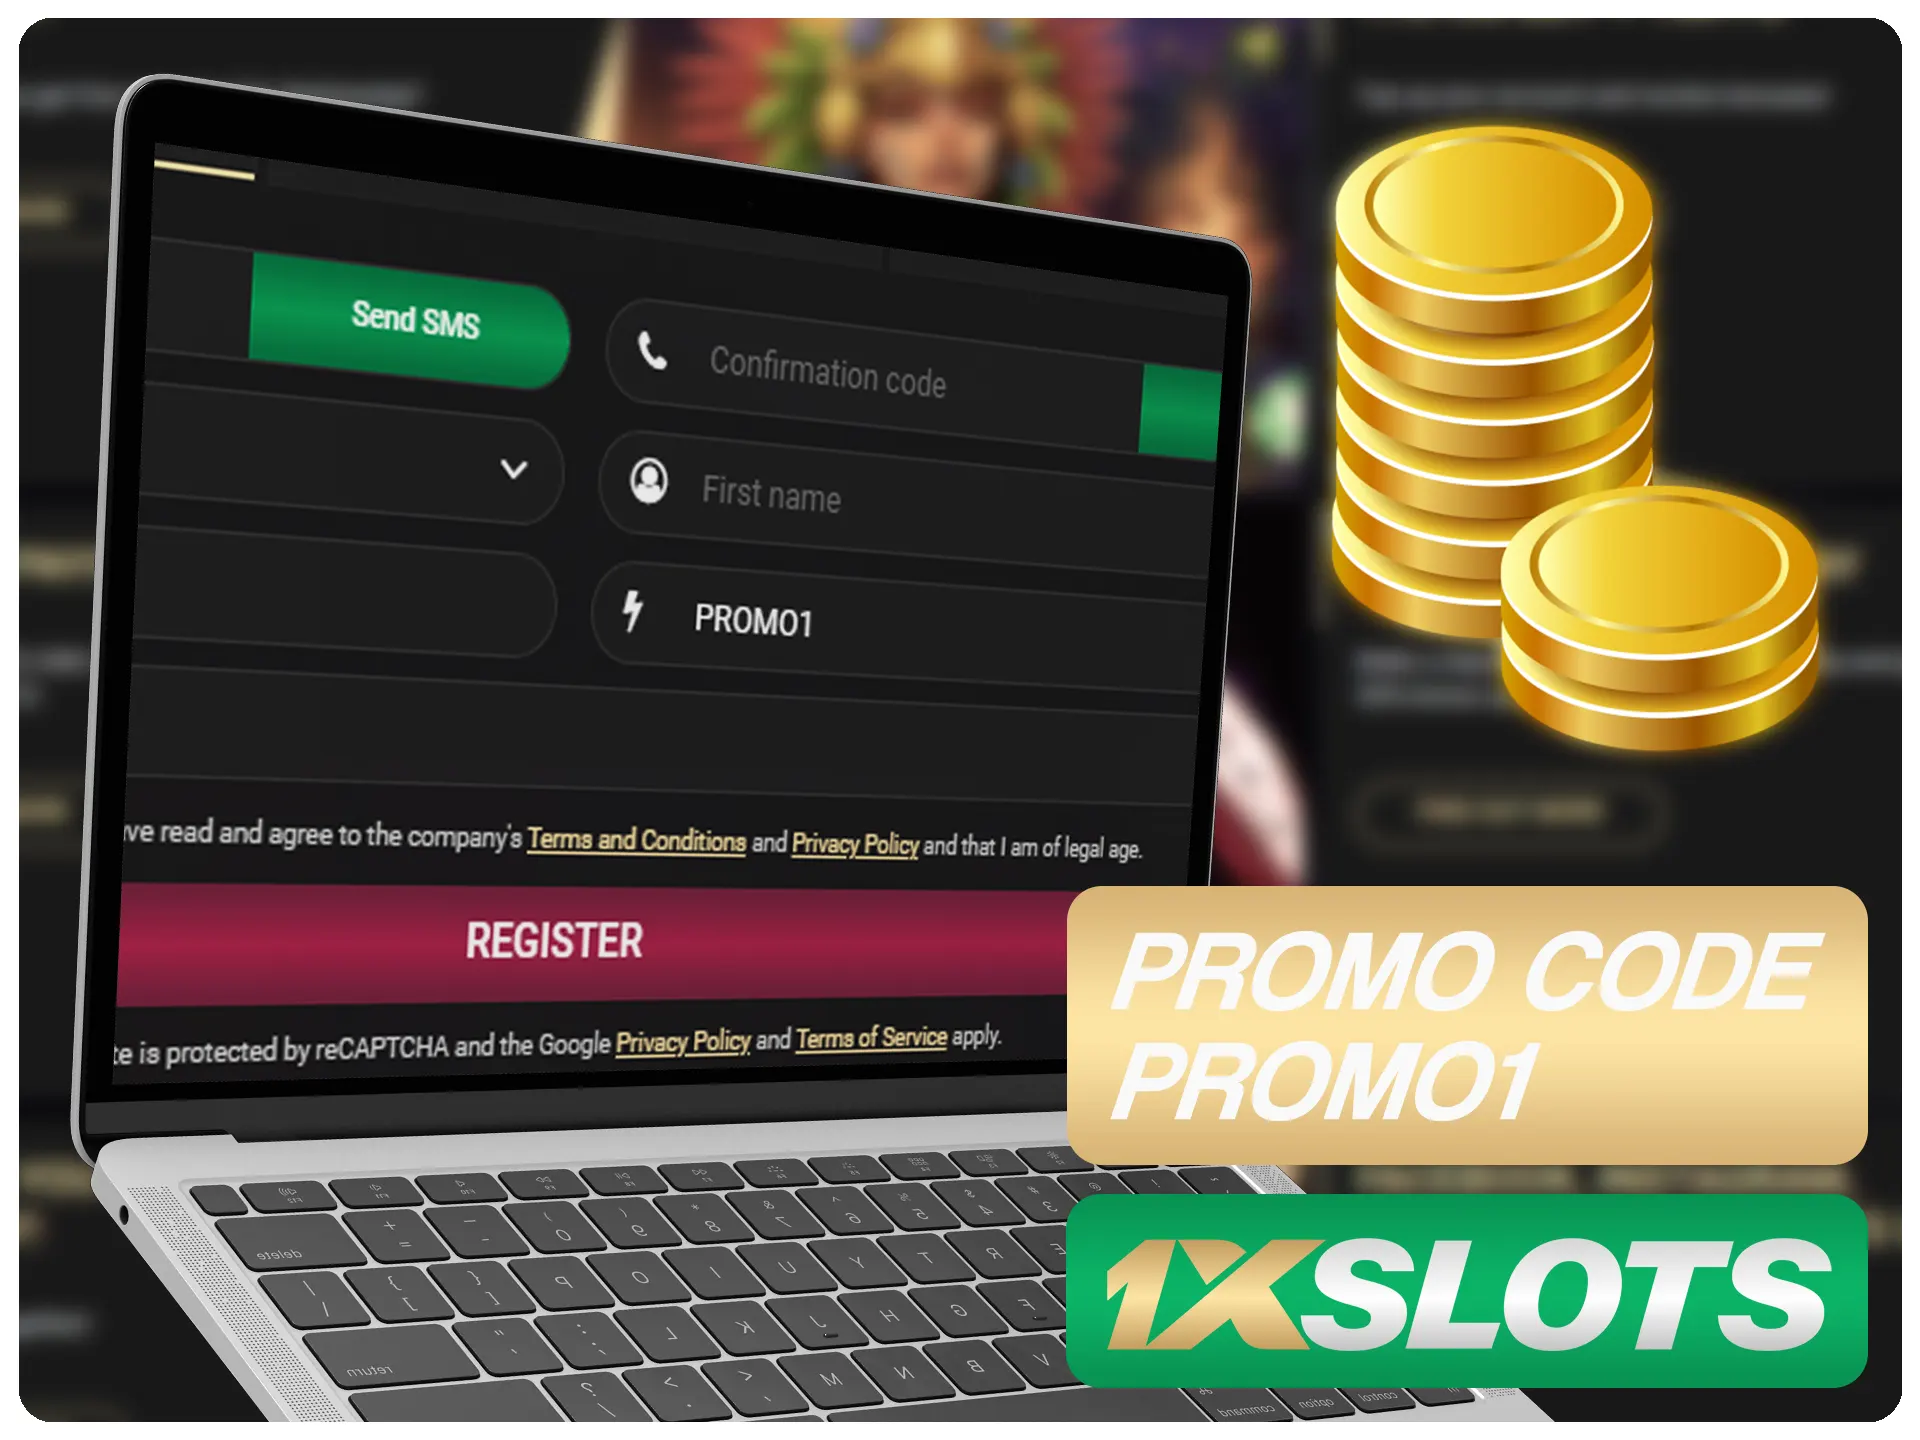 Insert special 1xSlots promocode during registration and get additional bonuses.